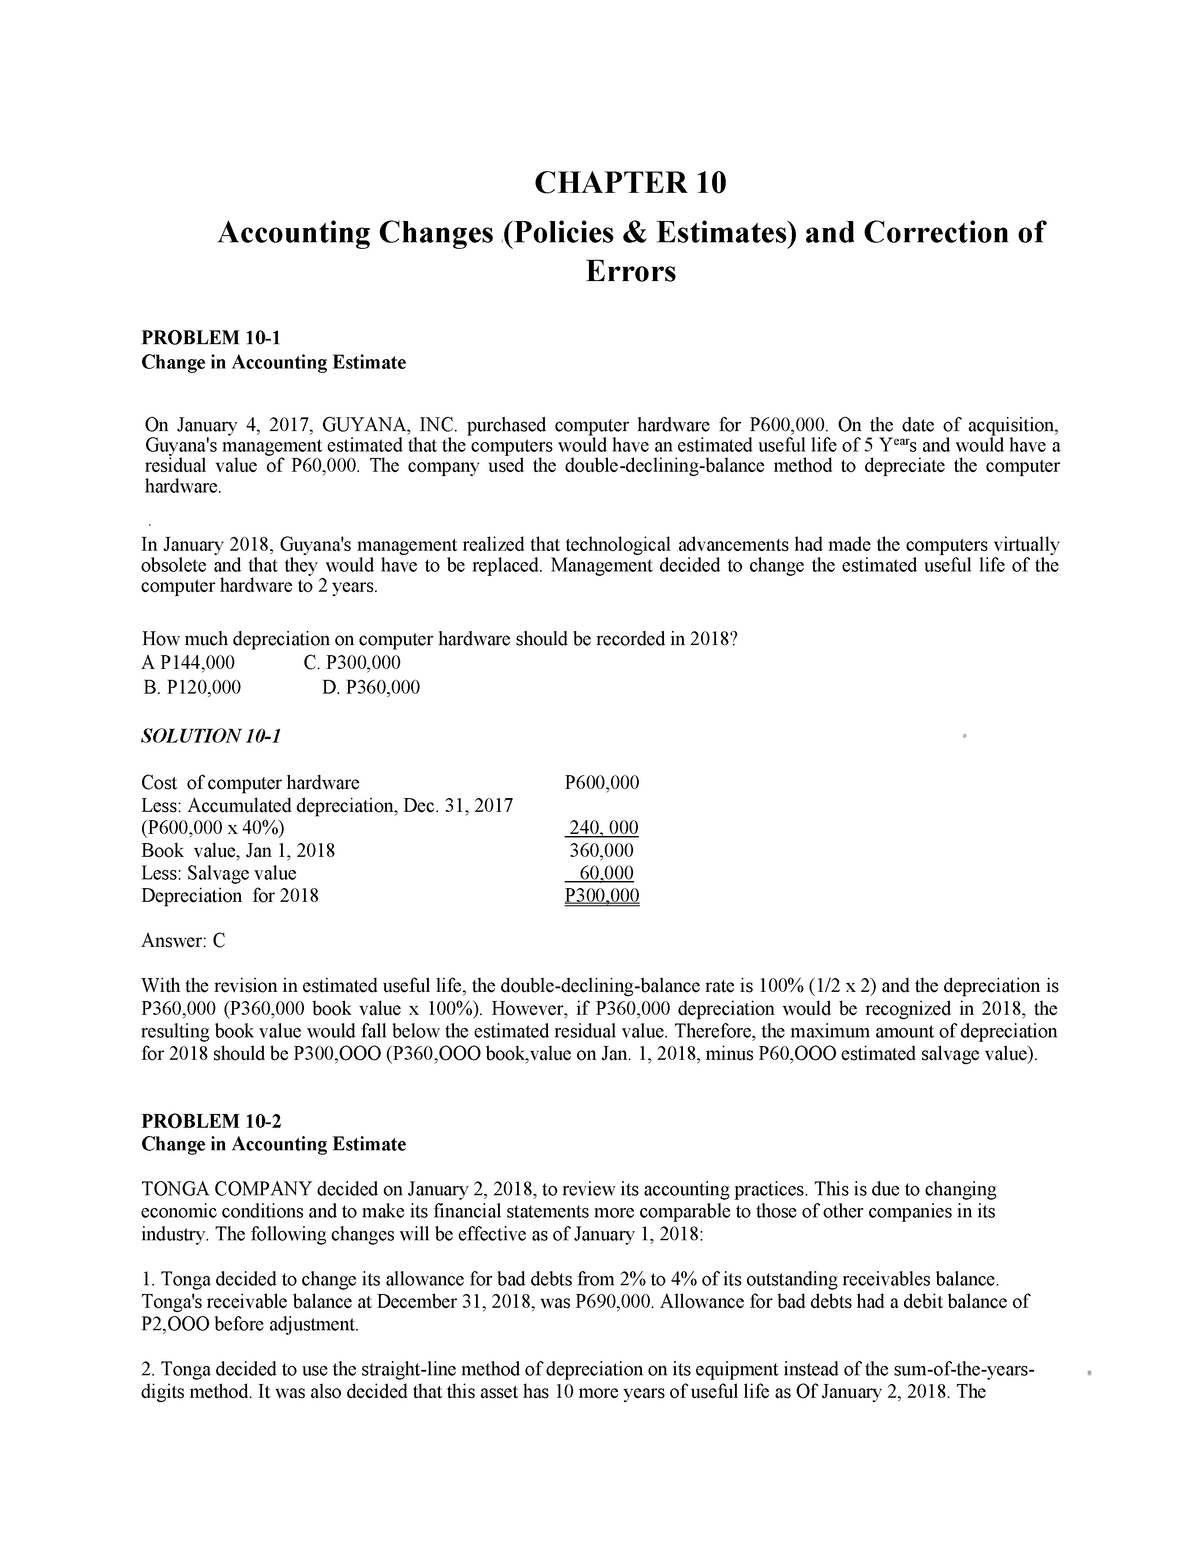 Audit of Accounting Changes and Correction of Errors - CHAPTER 10 